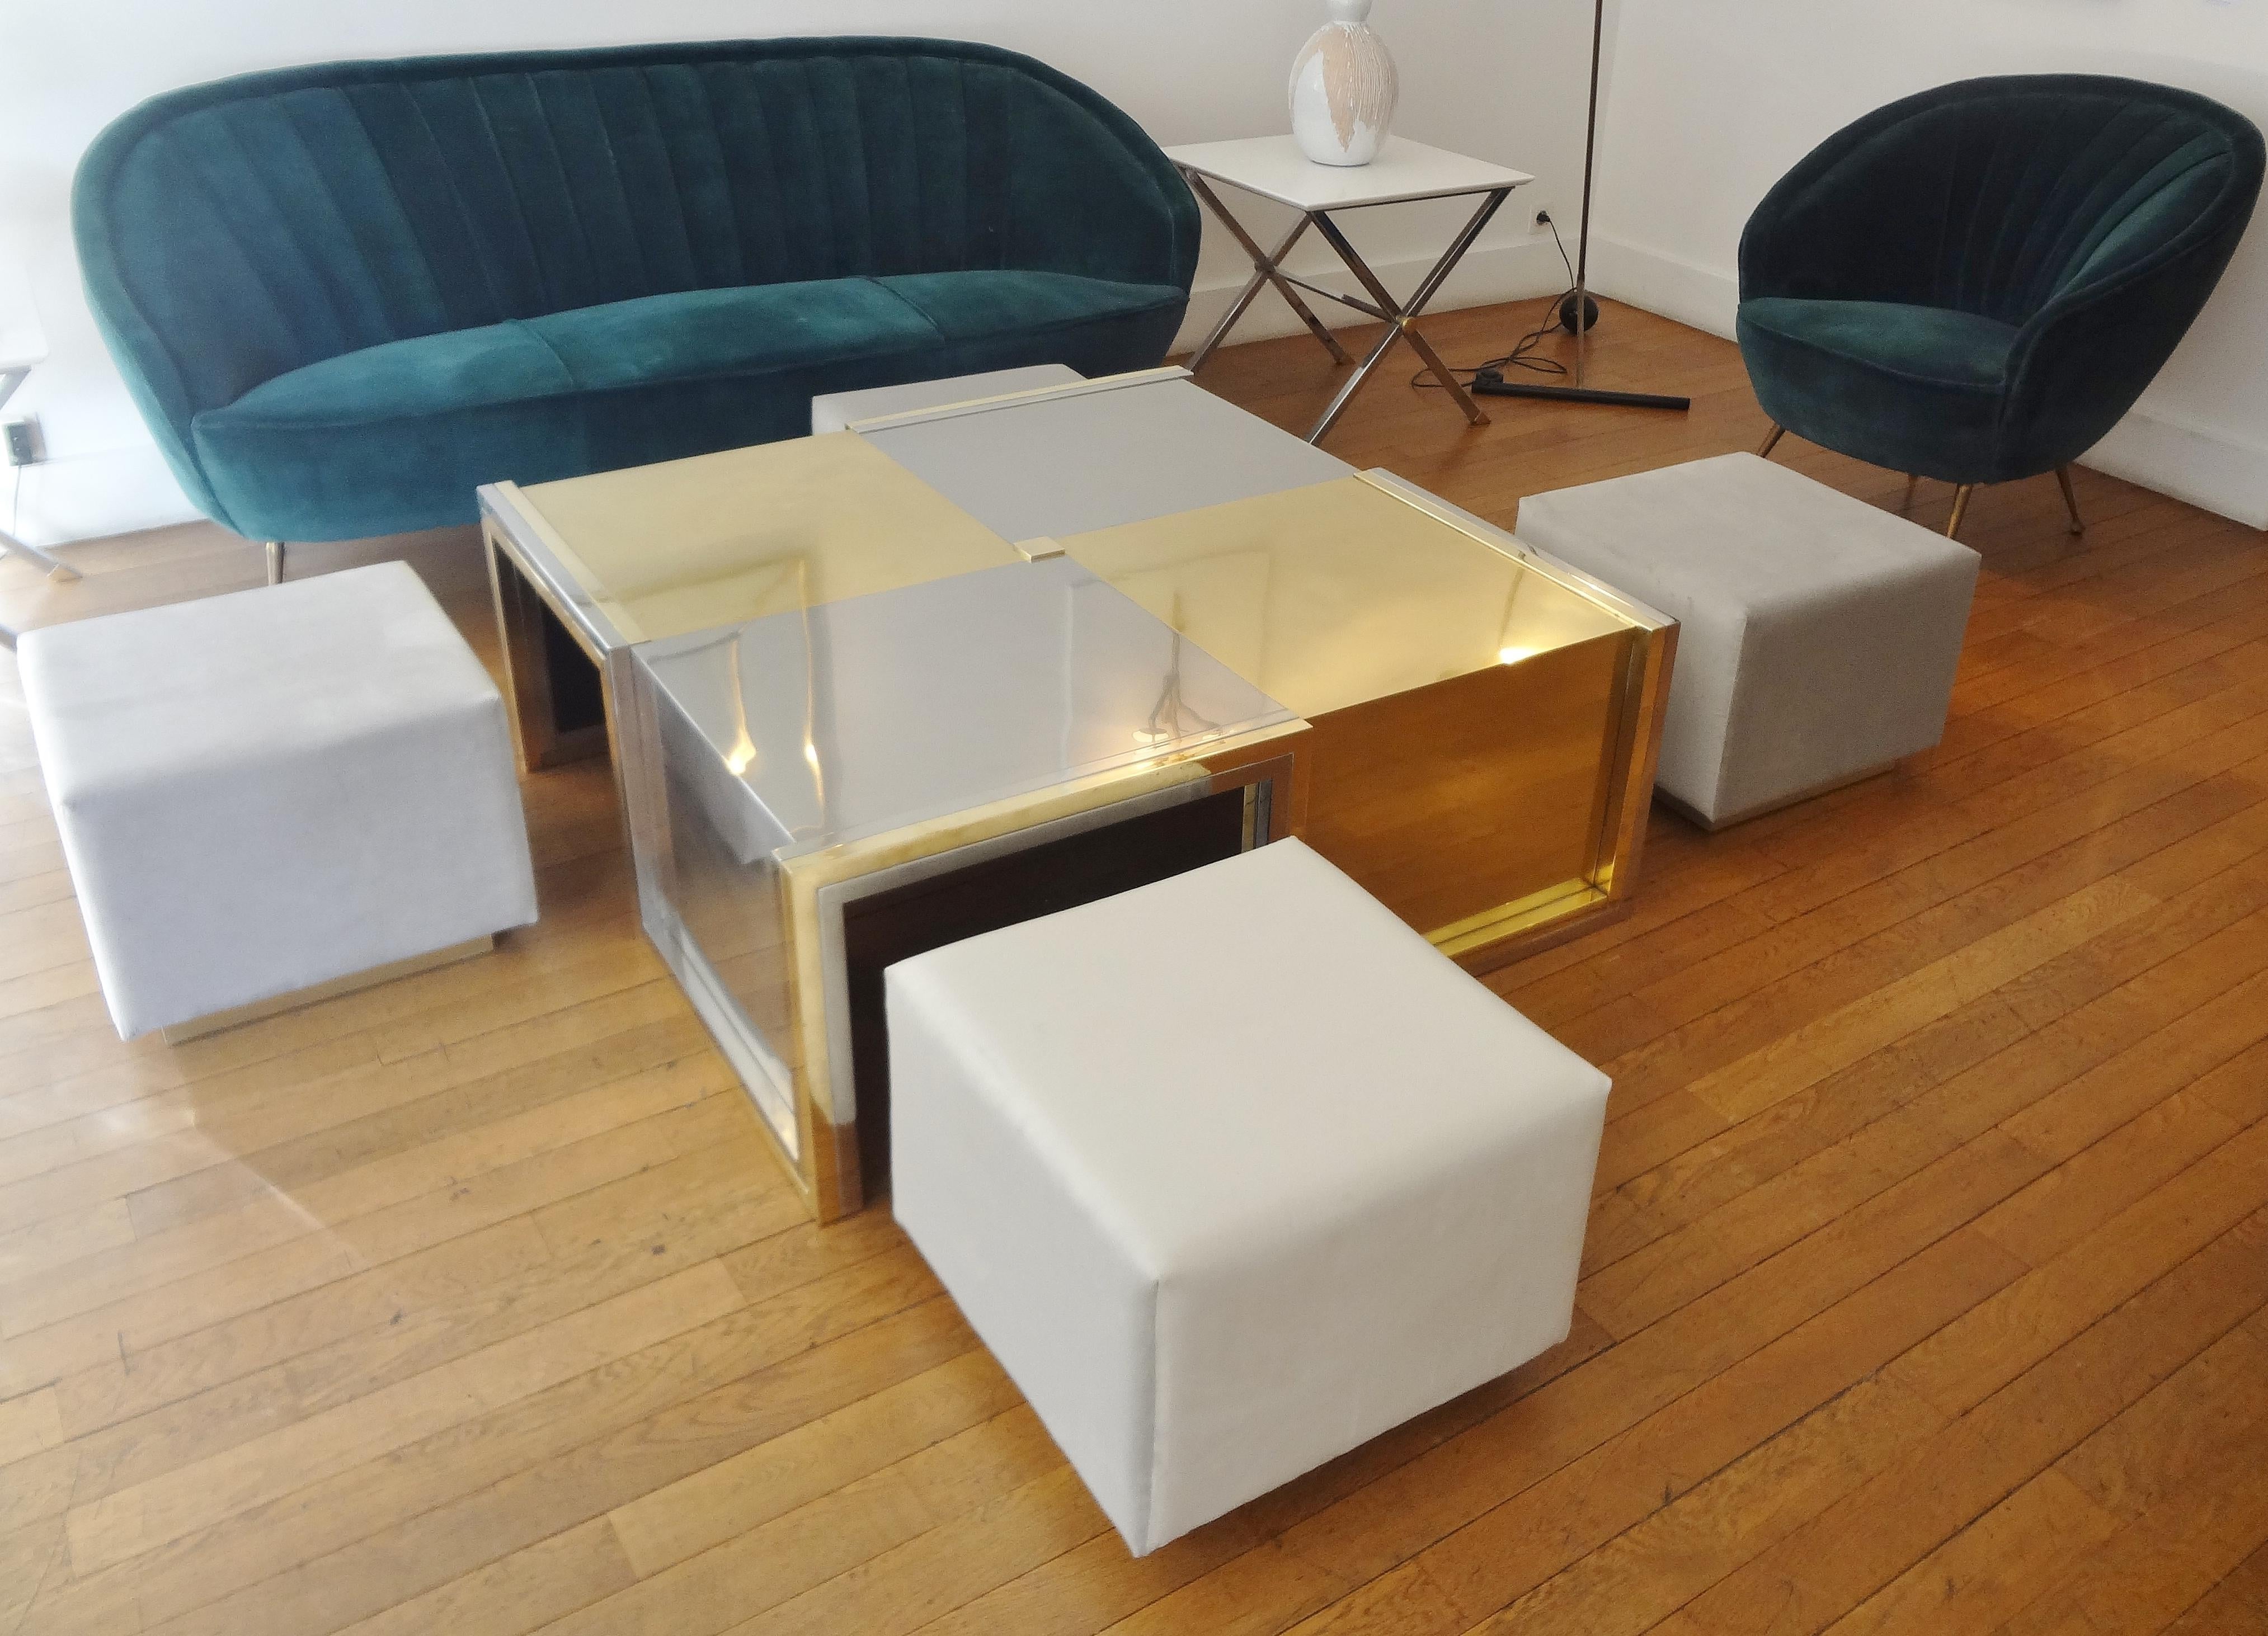 Gilt Square Coffee Table with 4 Stools, 1975 by Giovanni Banci, Italy For Sale